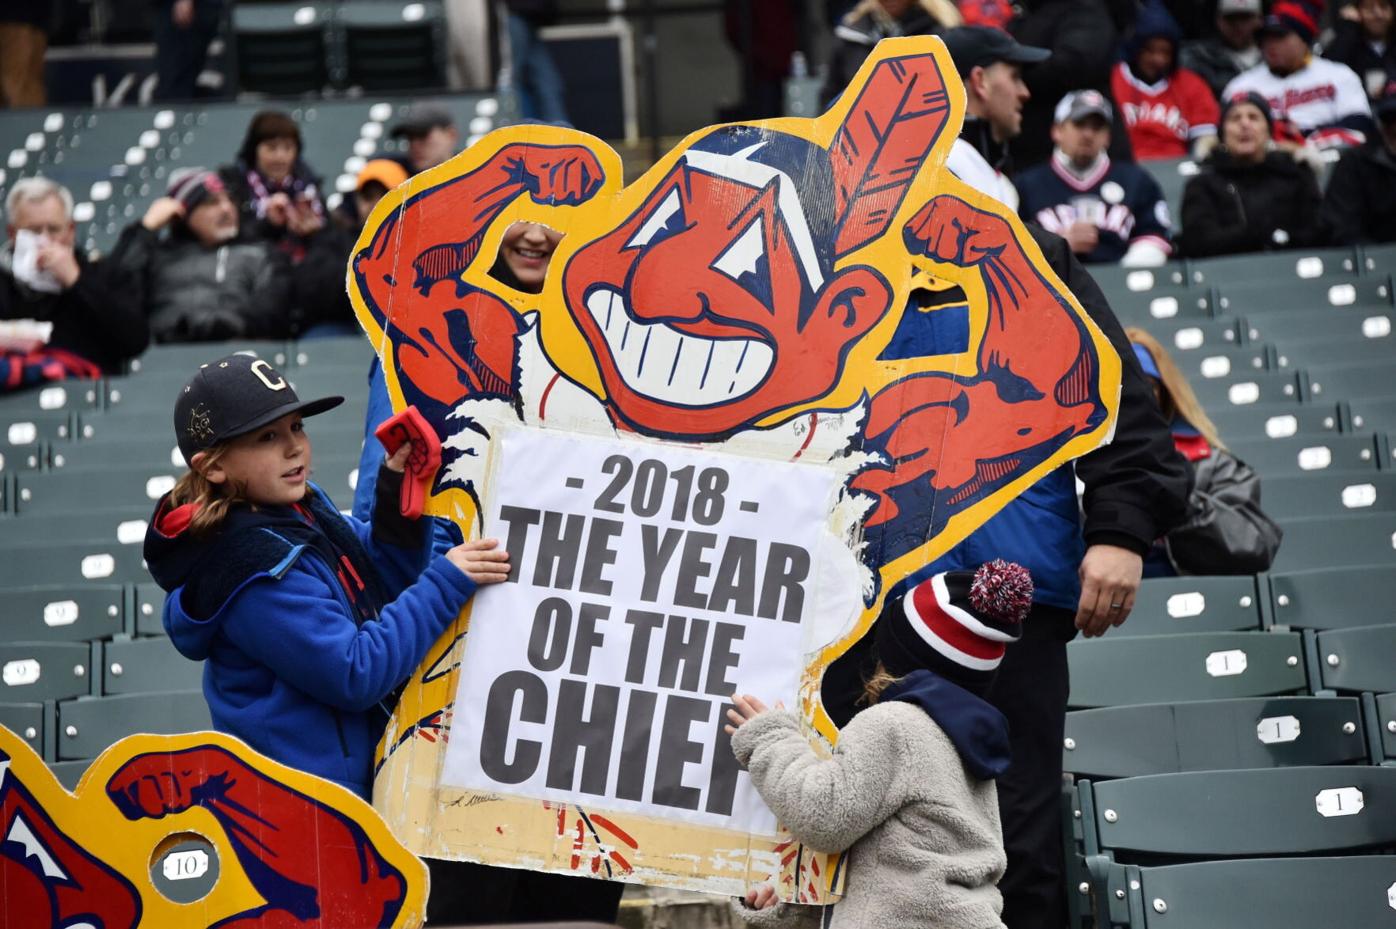 Should the Cleveland Indians be praised or criticized for salary